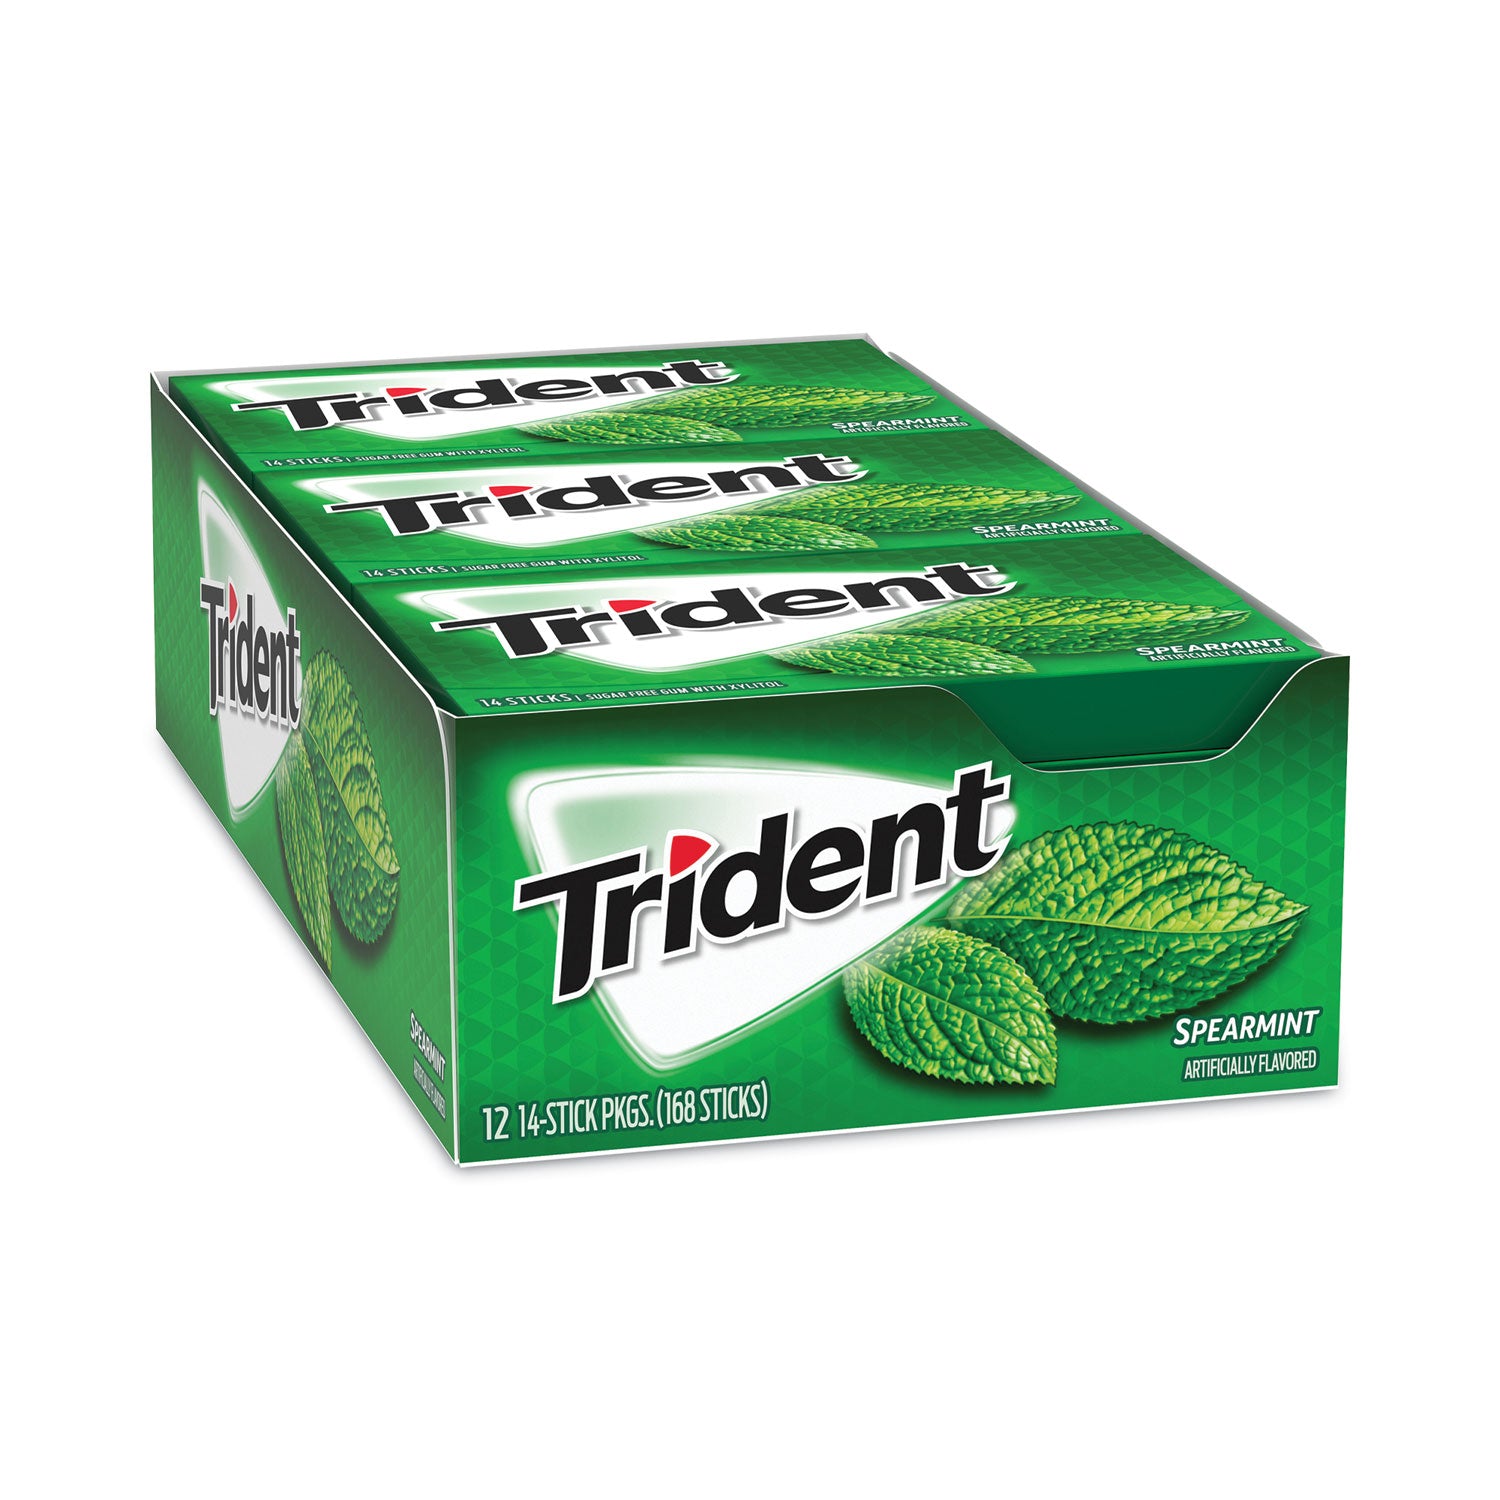 sugar-free-gum-spearmint-14-pieces-pack-12-packs-carton-ships-in-1-3-business-days_grr30400008 - 2